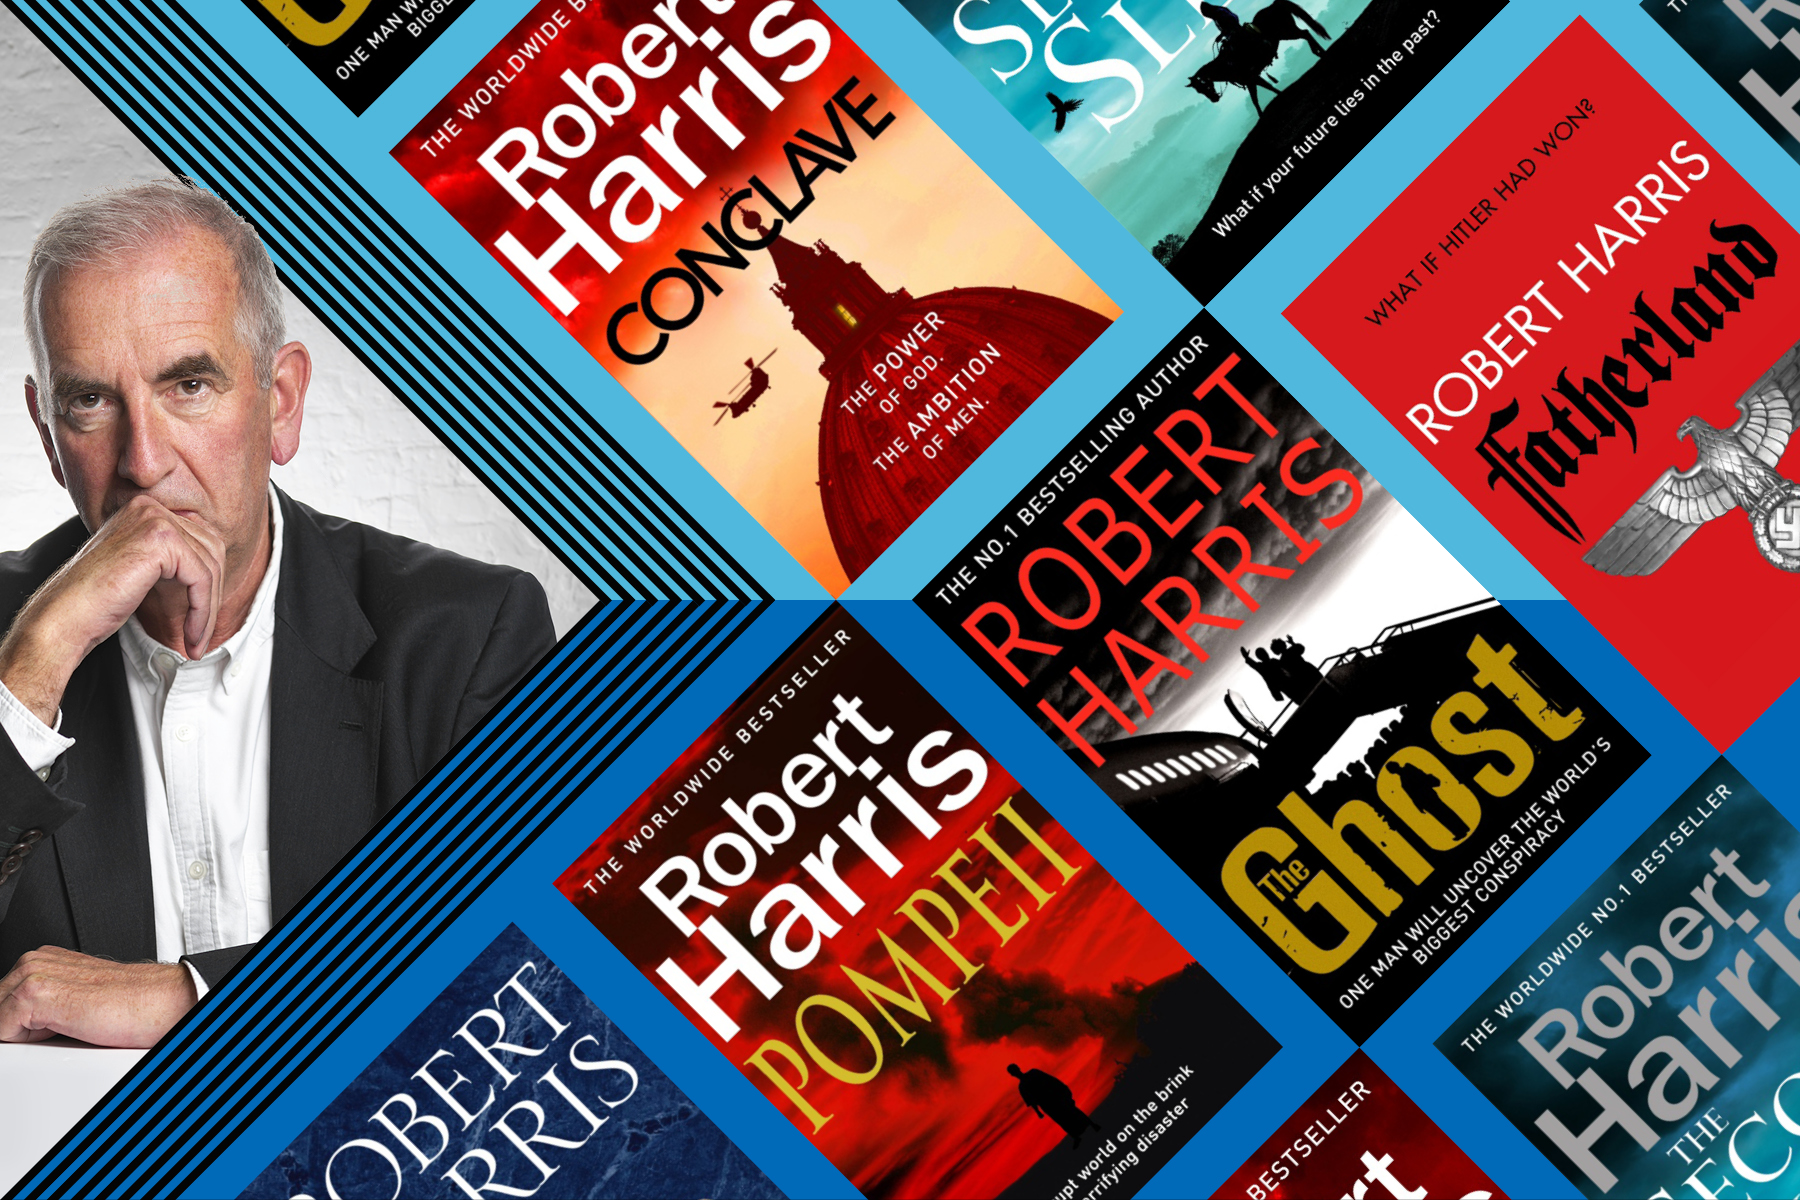 An image of Robert Harris next to a flatlay of his books on a blue background